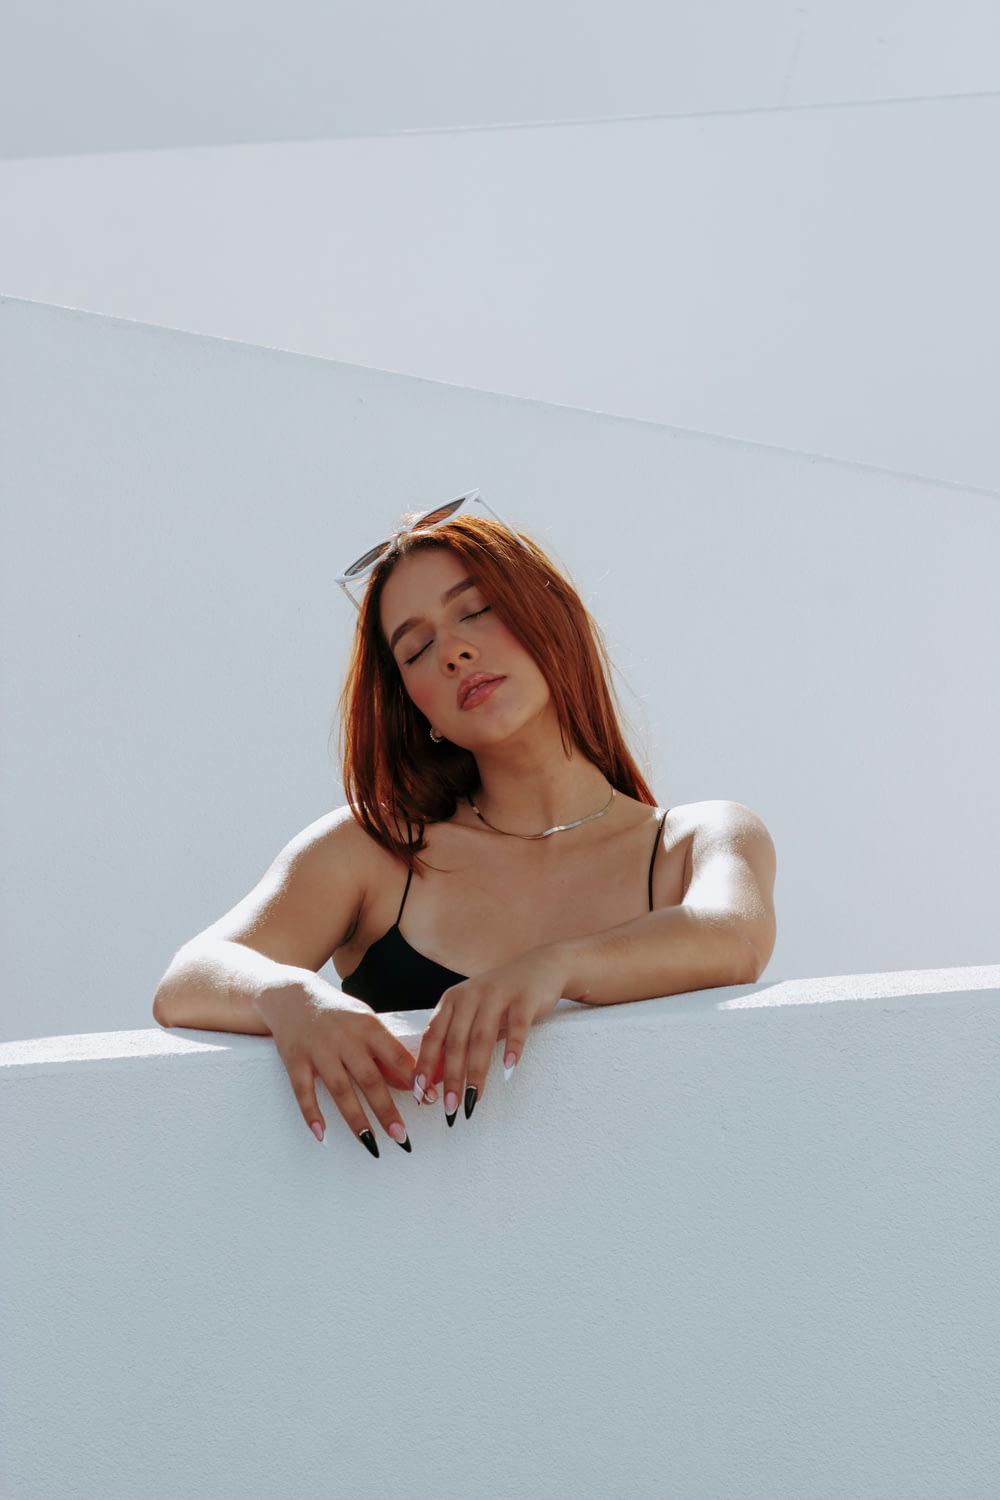 a woman with red hair leaning on a wall